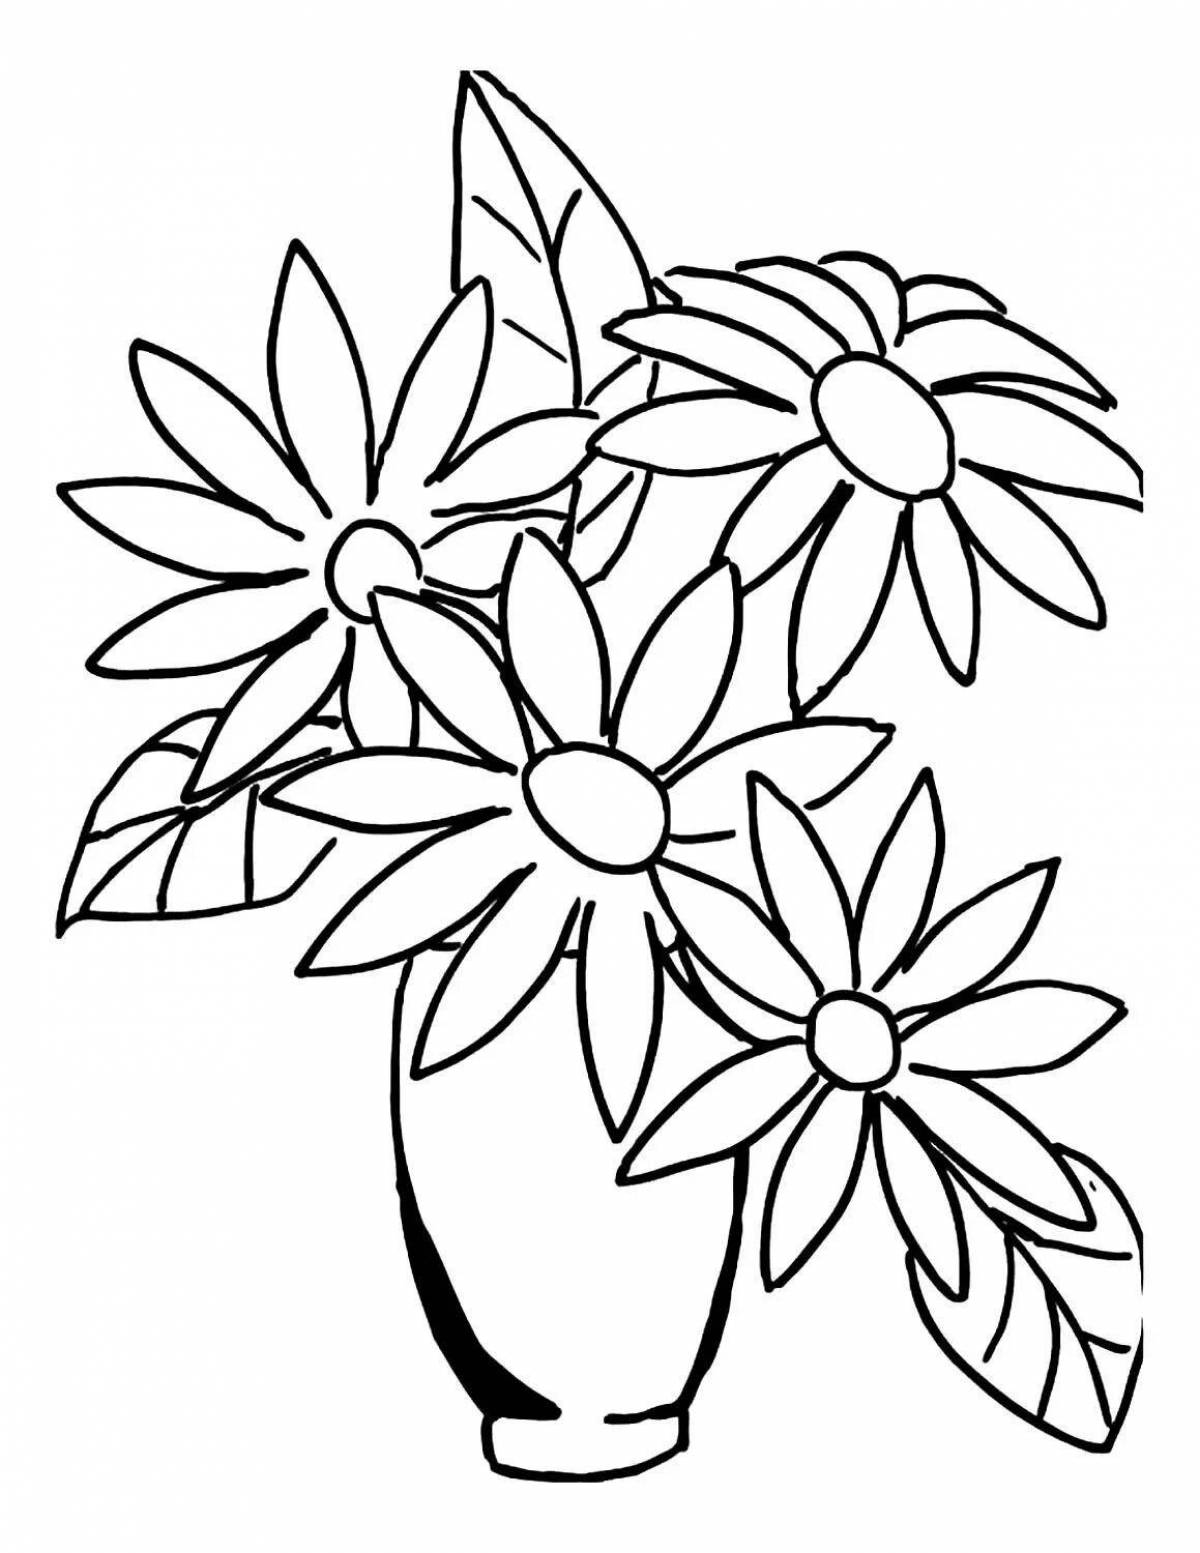 Coloring page charming bouquet of flowers in a vase